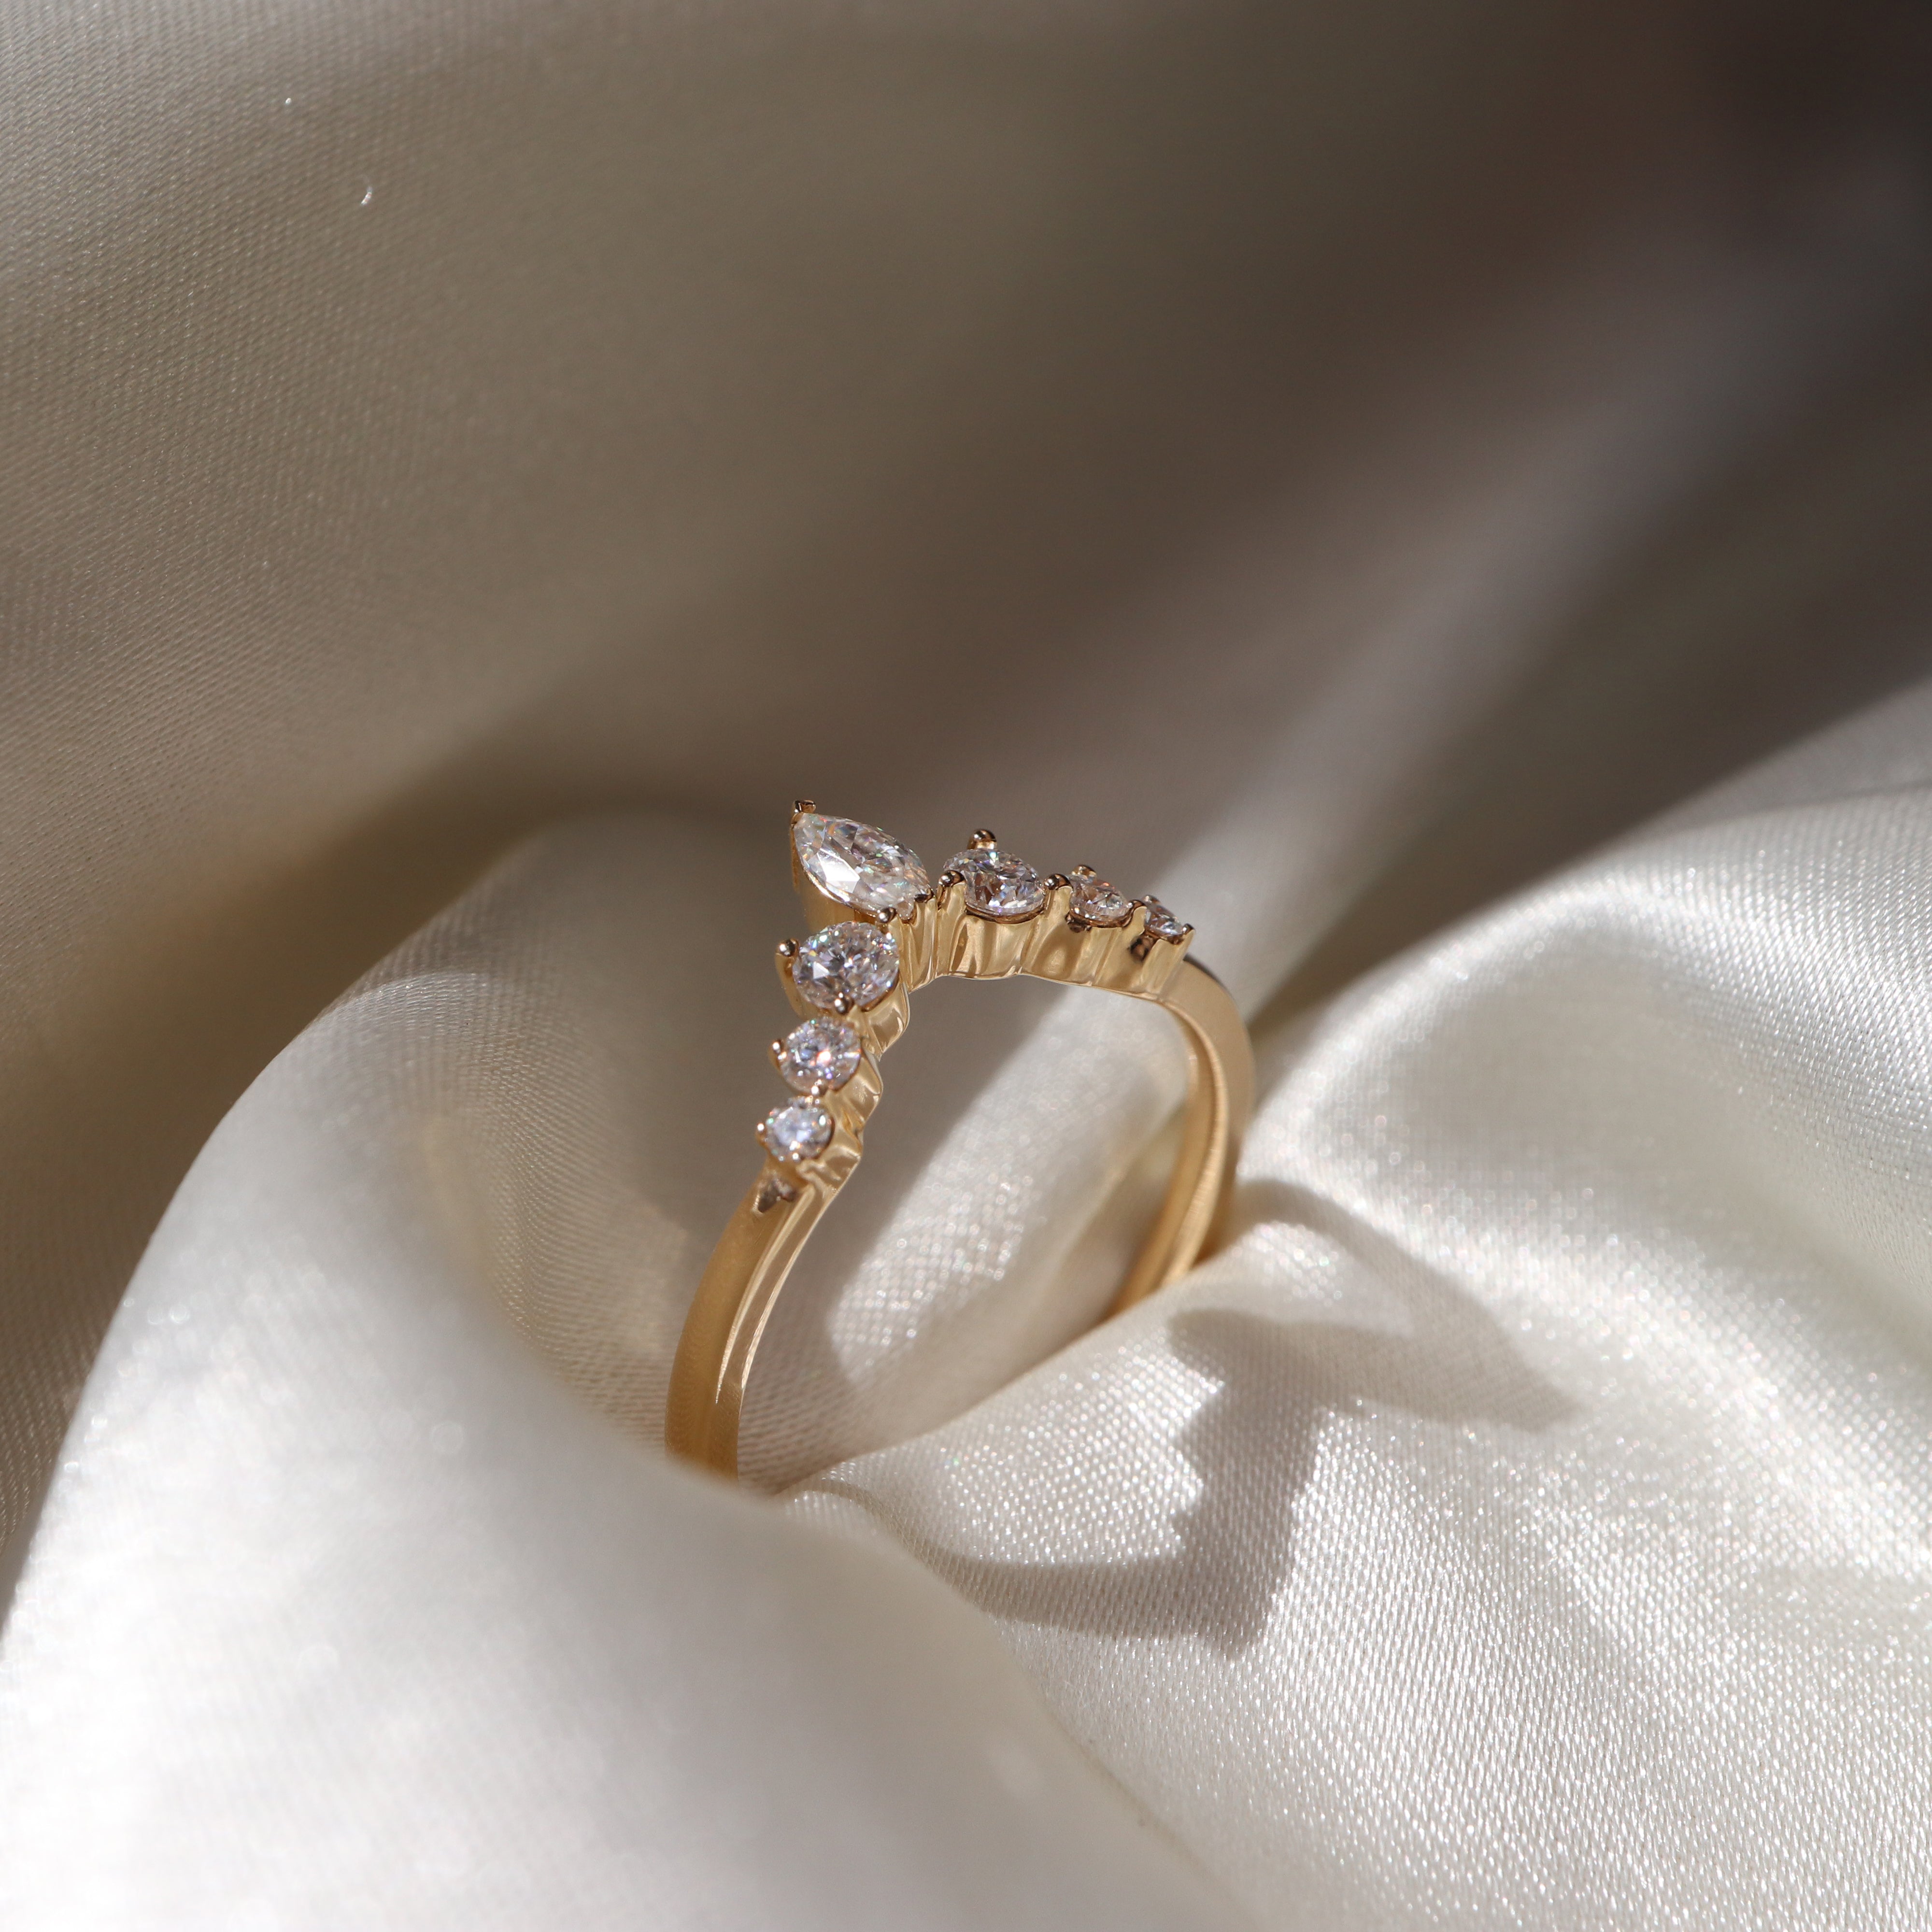 The Diana Ring - Crown Wedding Band